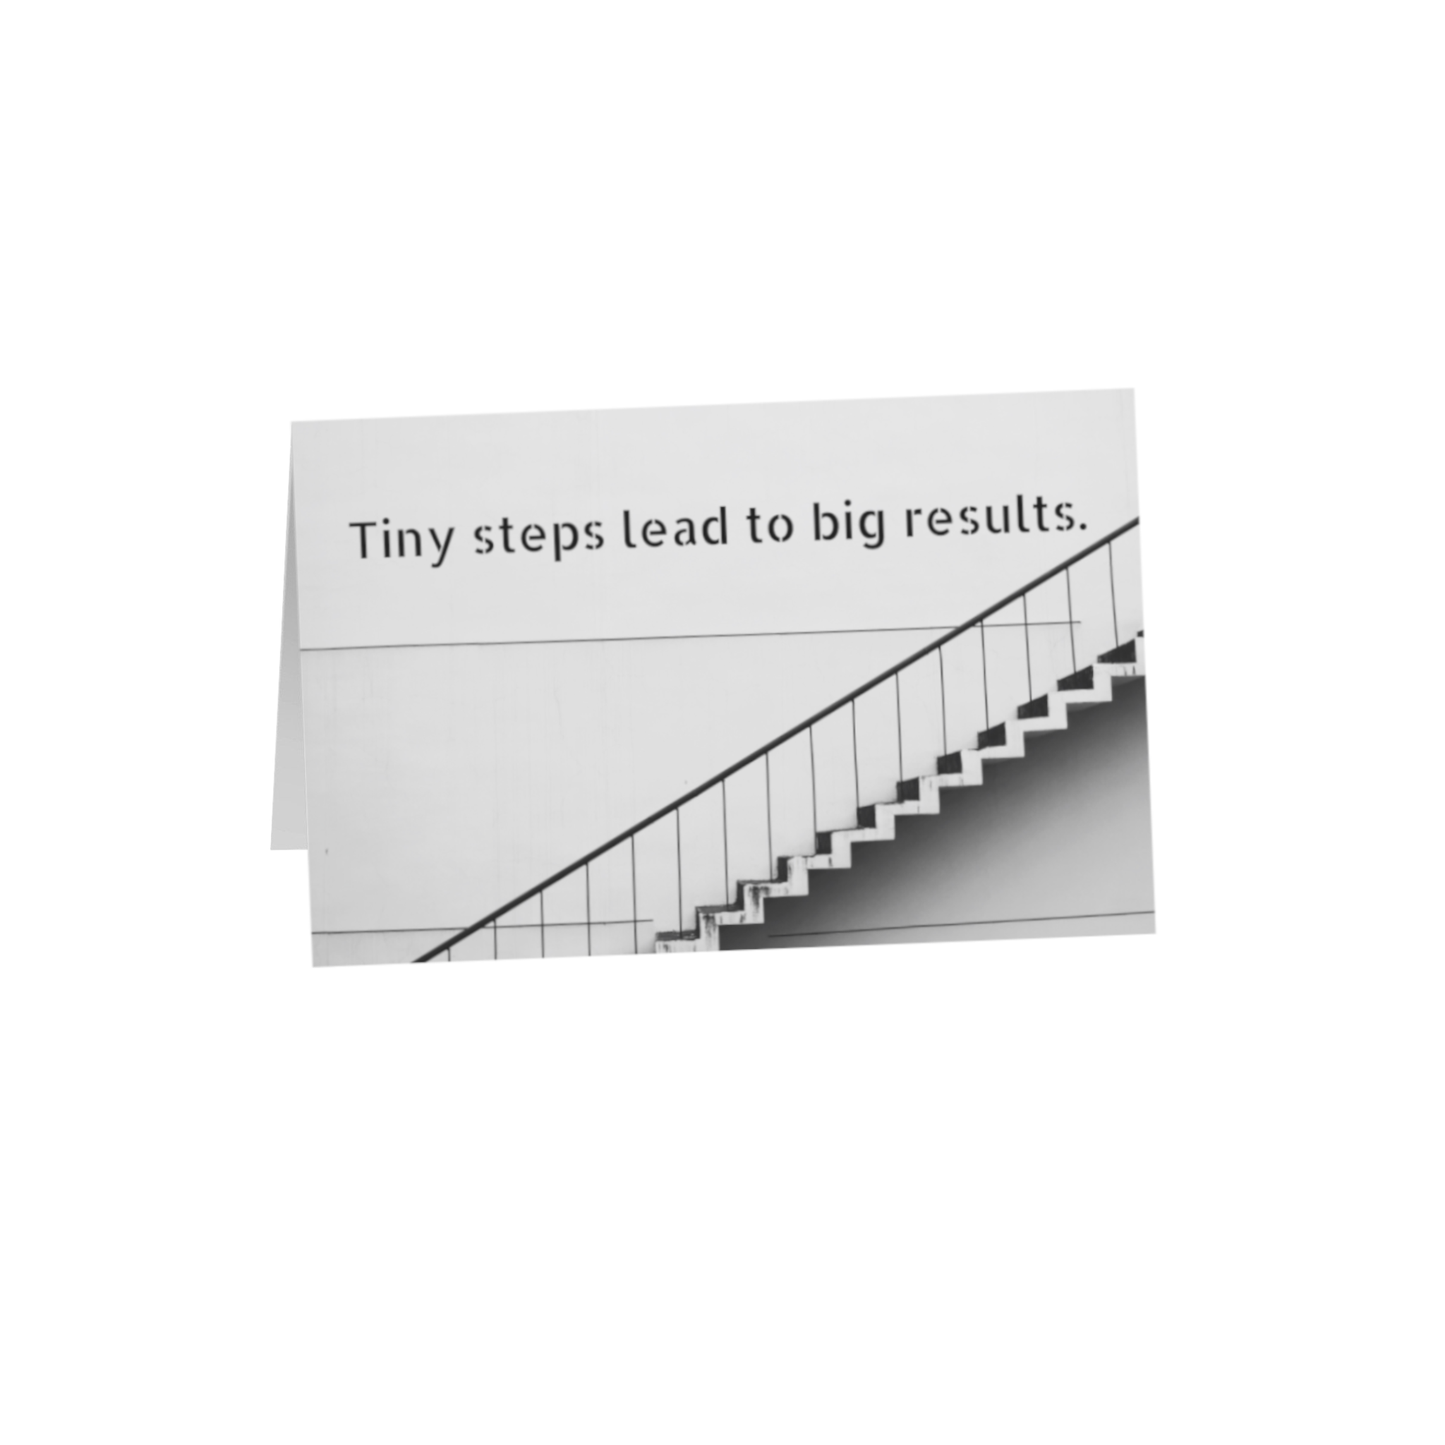 Tiny steps lead to big results 8.5x5.5 Greeting Card